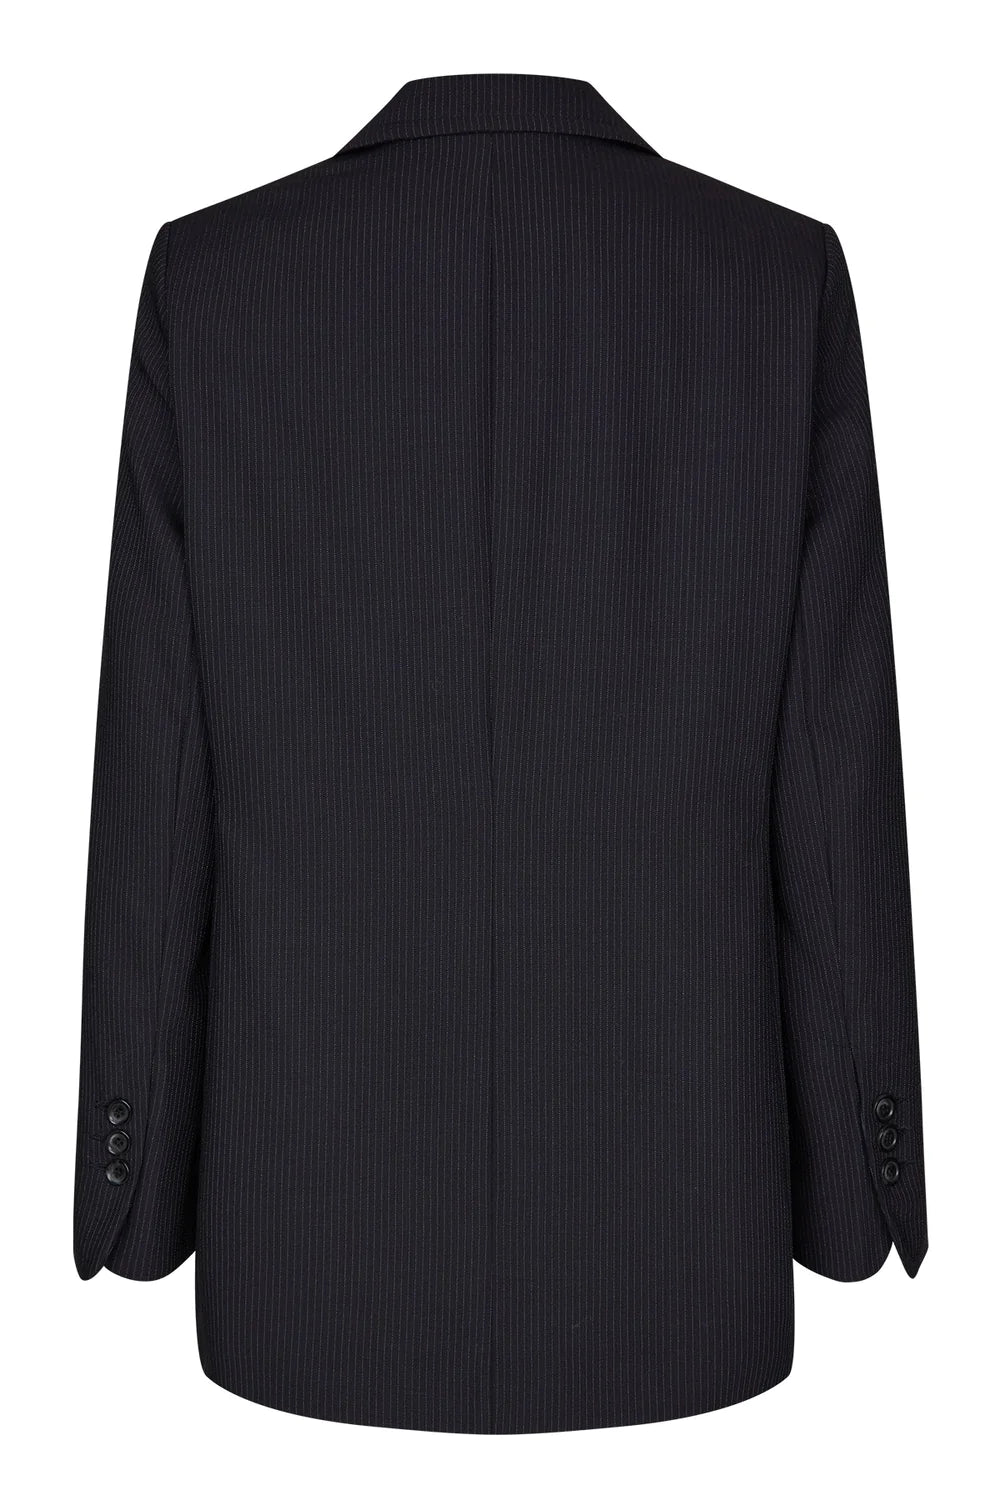 Carrin - Impeccable Jacket Pinstripe